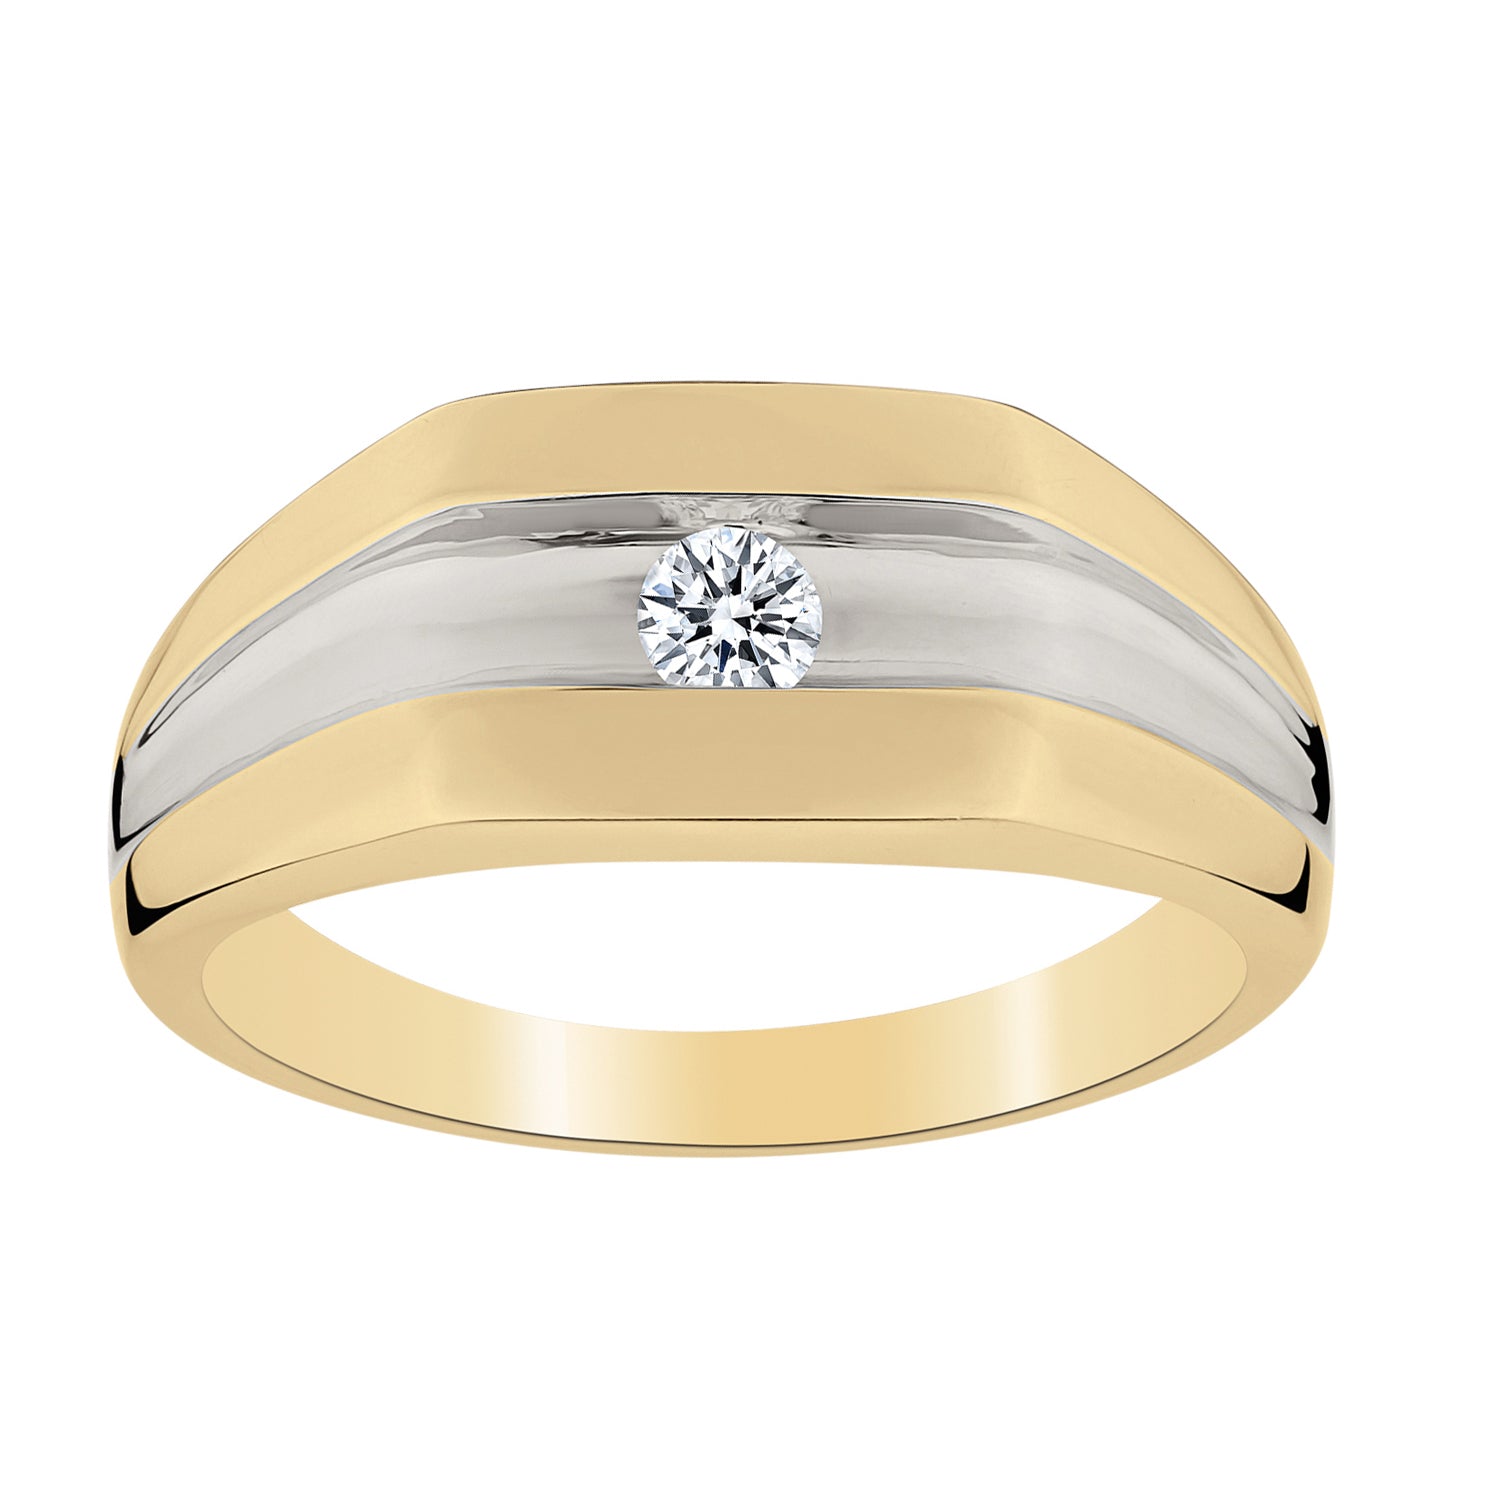 .20 CARAT DIAMOND GENTLEMAN'S RING, 10kt WHITE AND YELLOW GOLD (TWO TONE)…....................NOW - Griffin Jewellery Designs